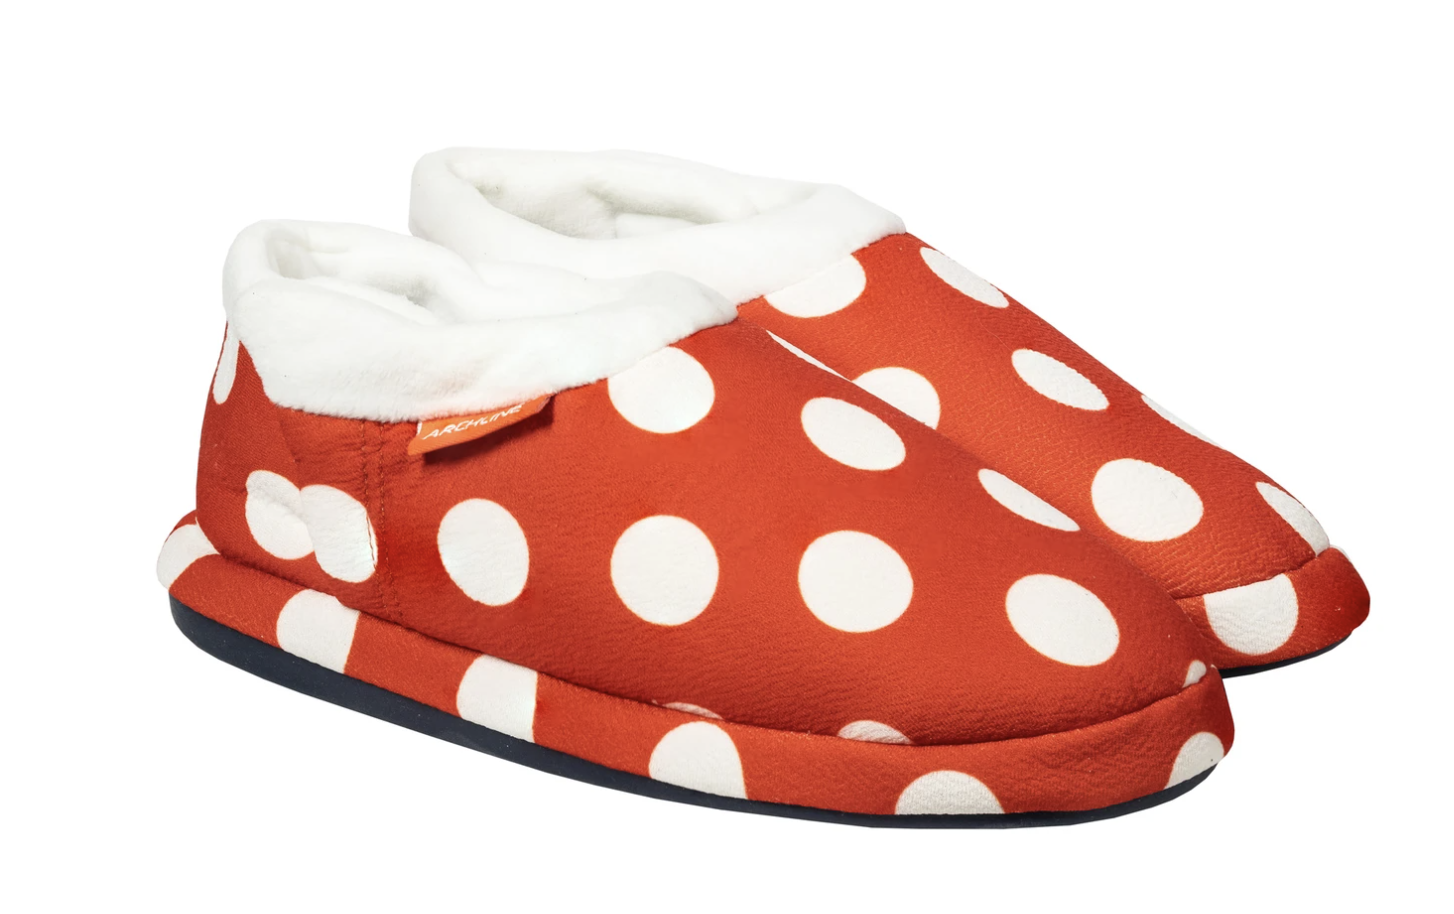 Orthotic Slippers CLOSED Back Scuffs Moccasins Pain Relief - Red Polka Dots - EUR 38 (Womens US 7)